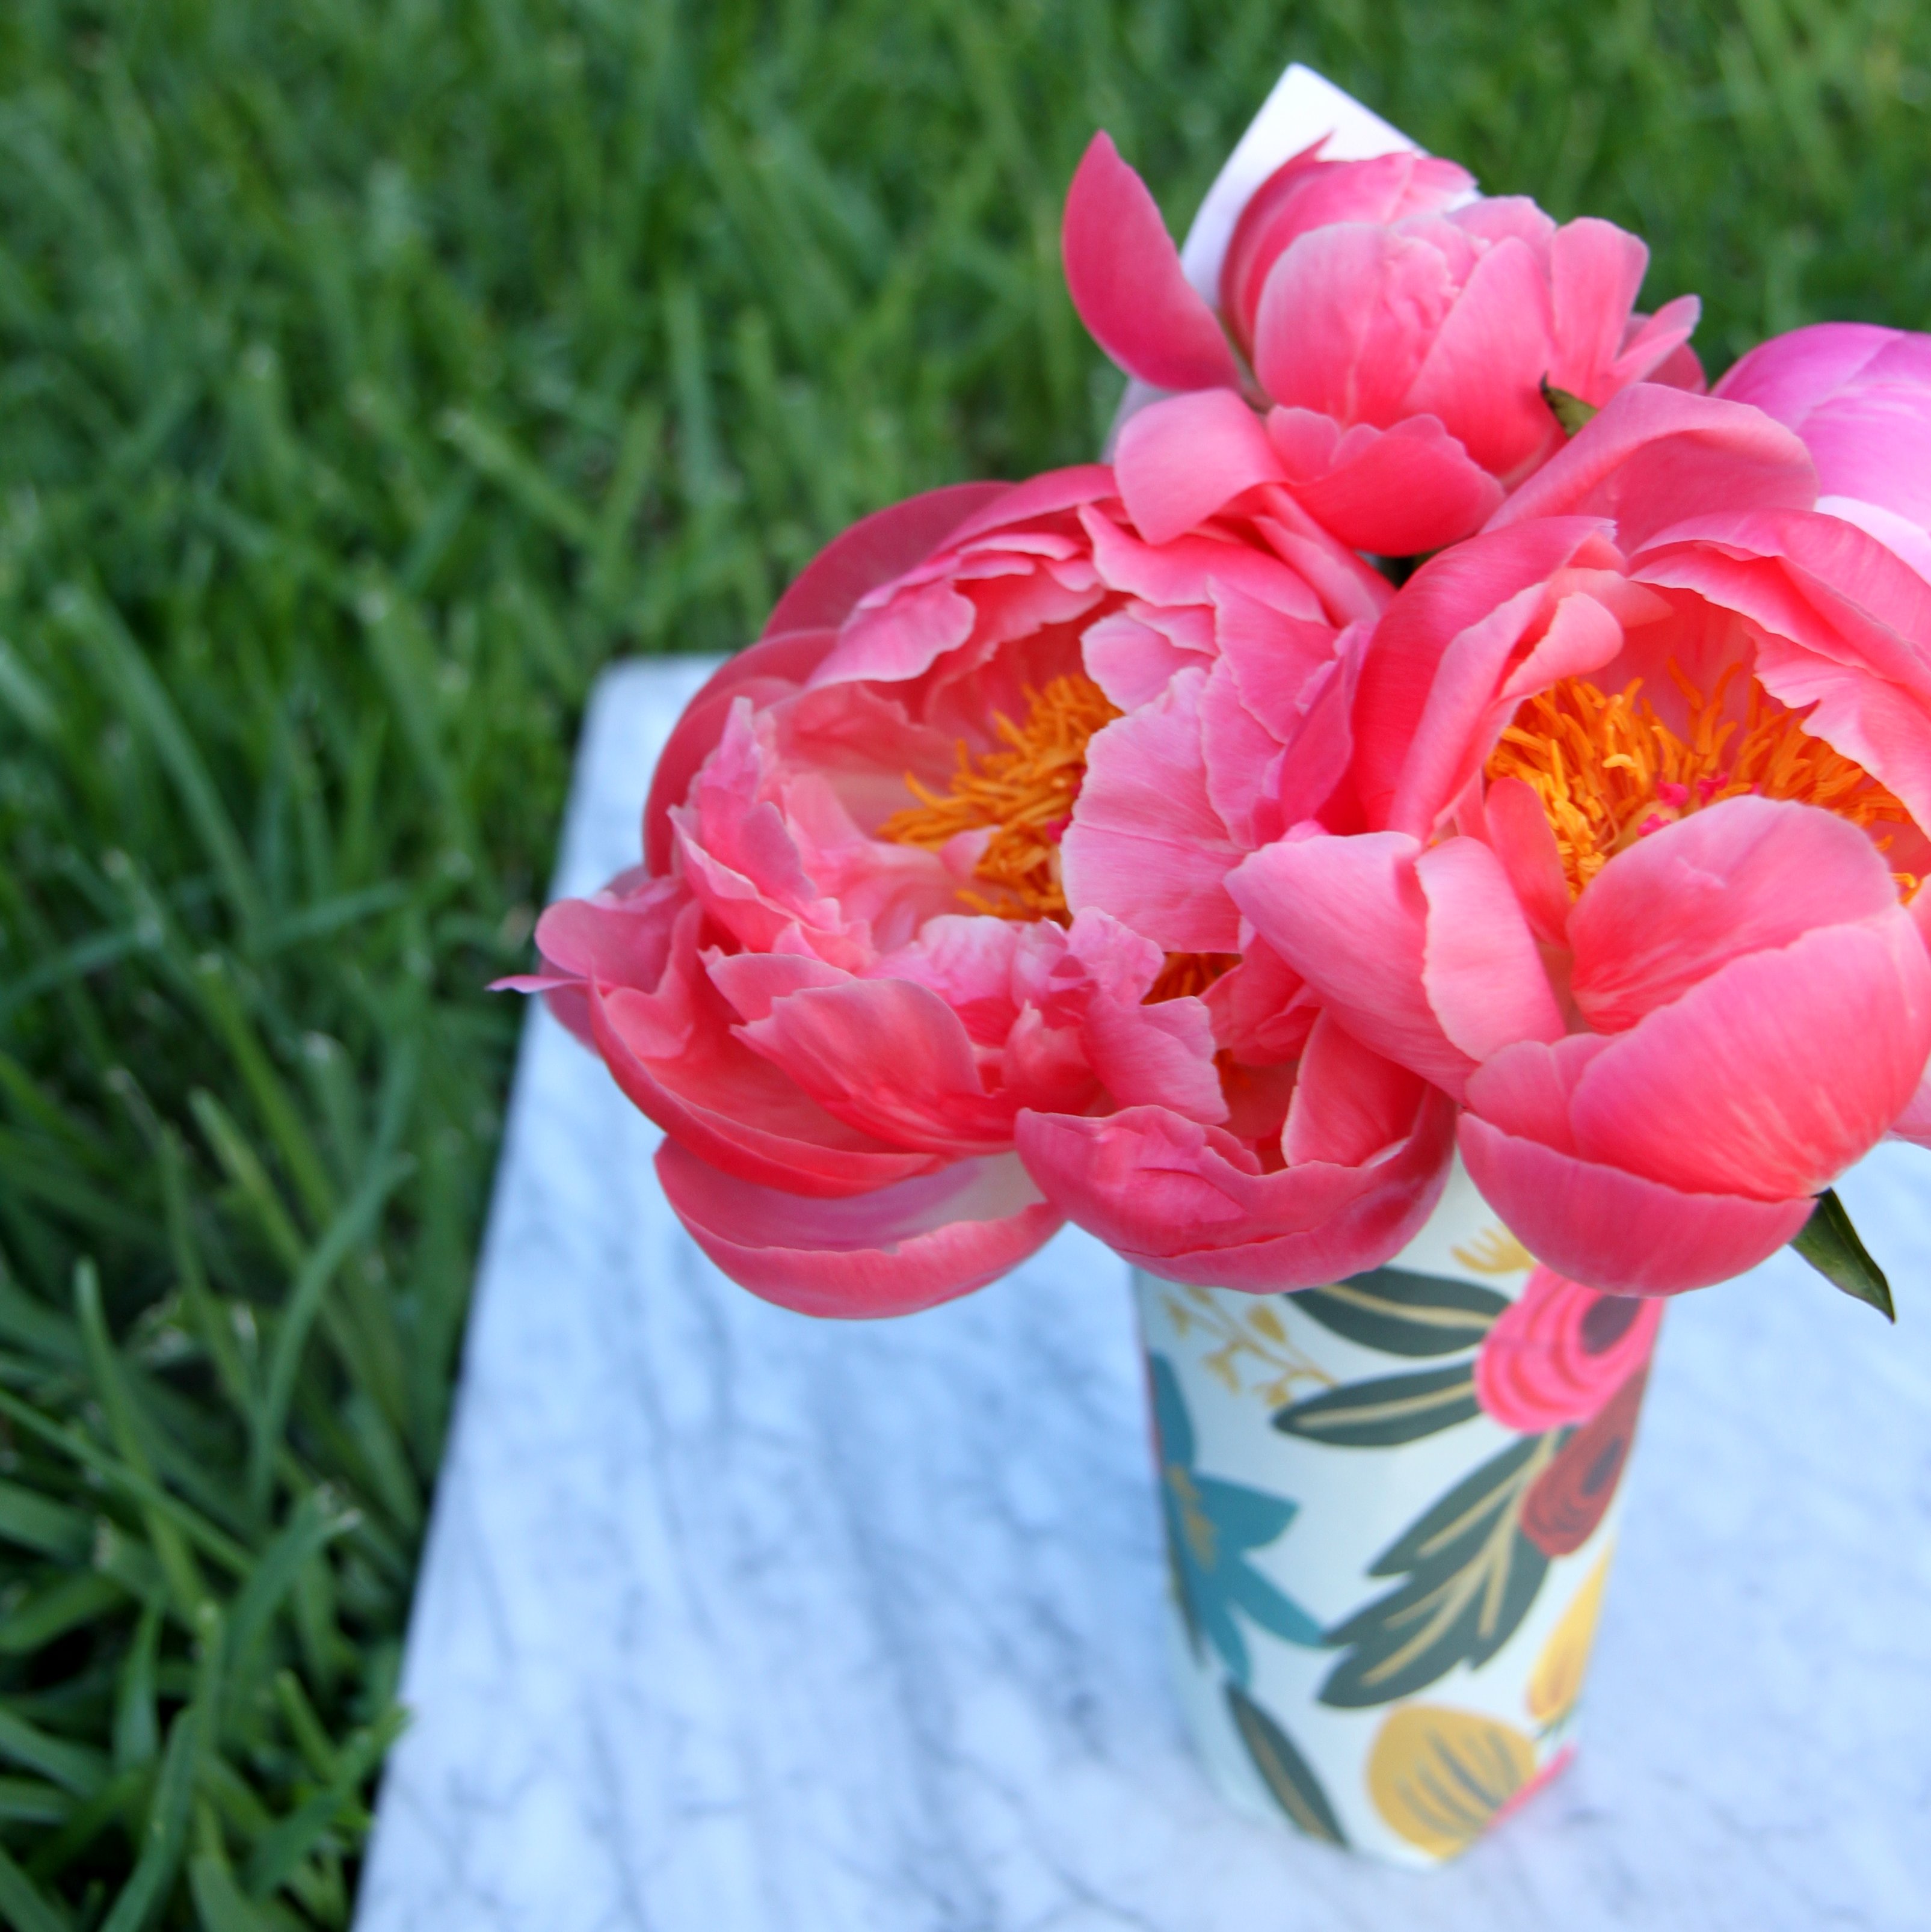 Easy, pretty DIY wrapped bouquets (for teacher appreciation, Mother's Day and every day gifting).